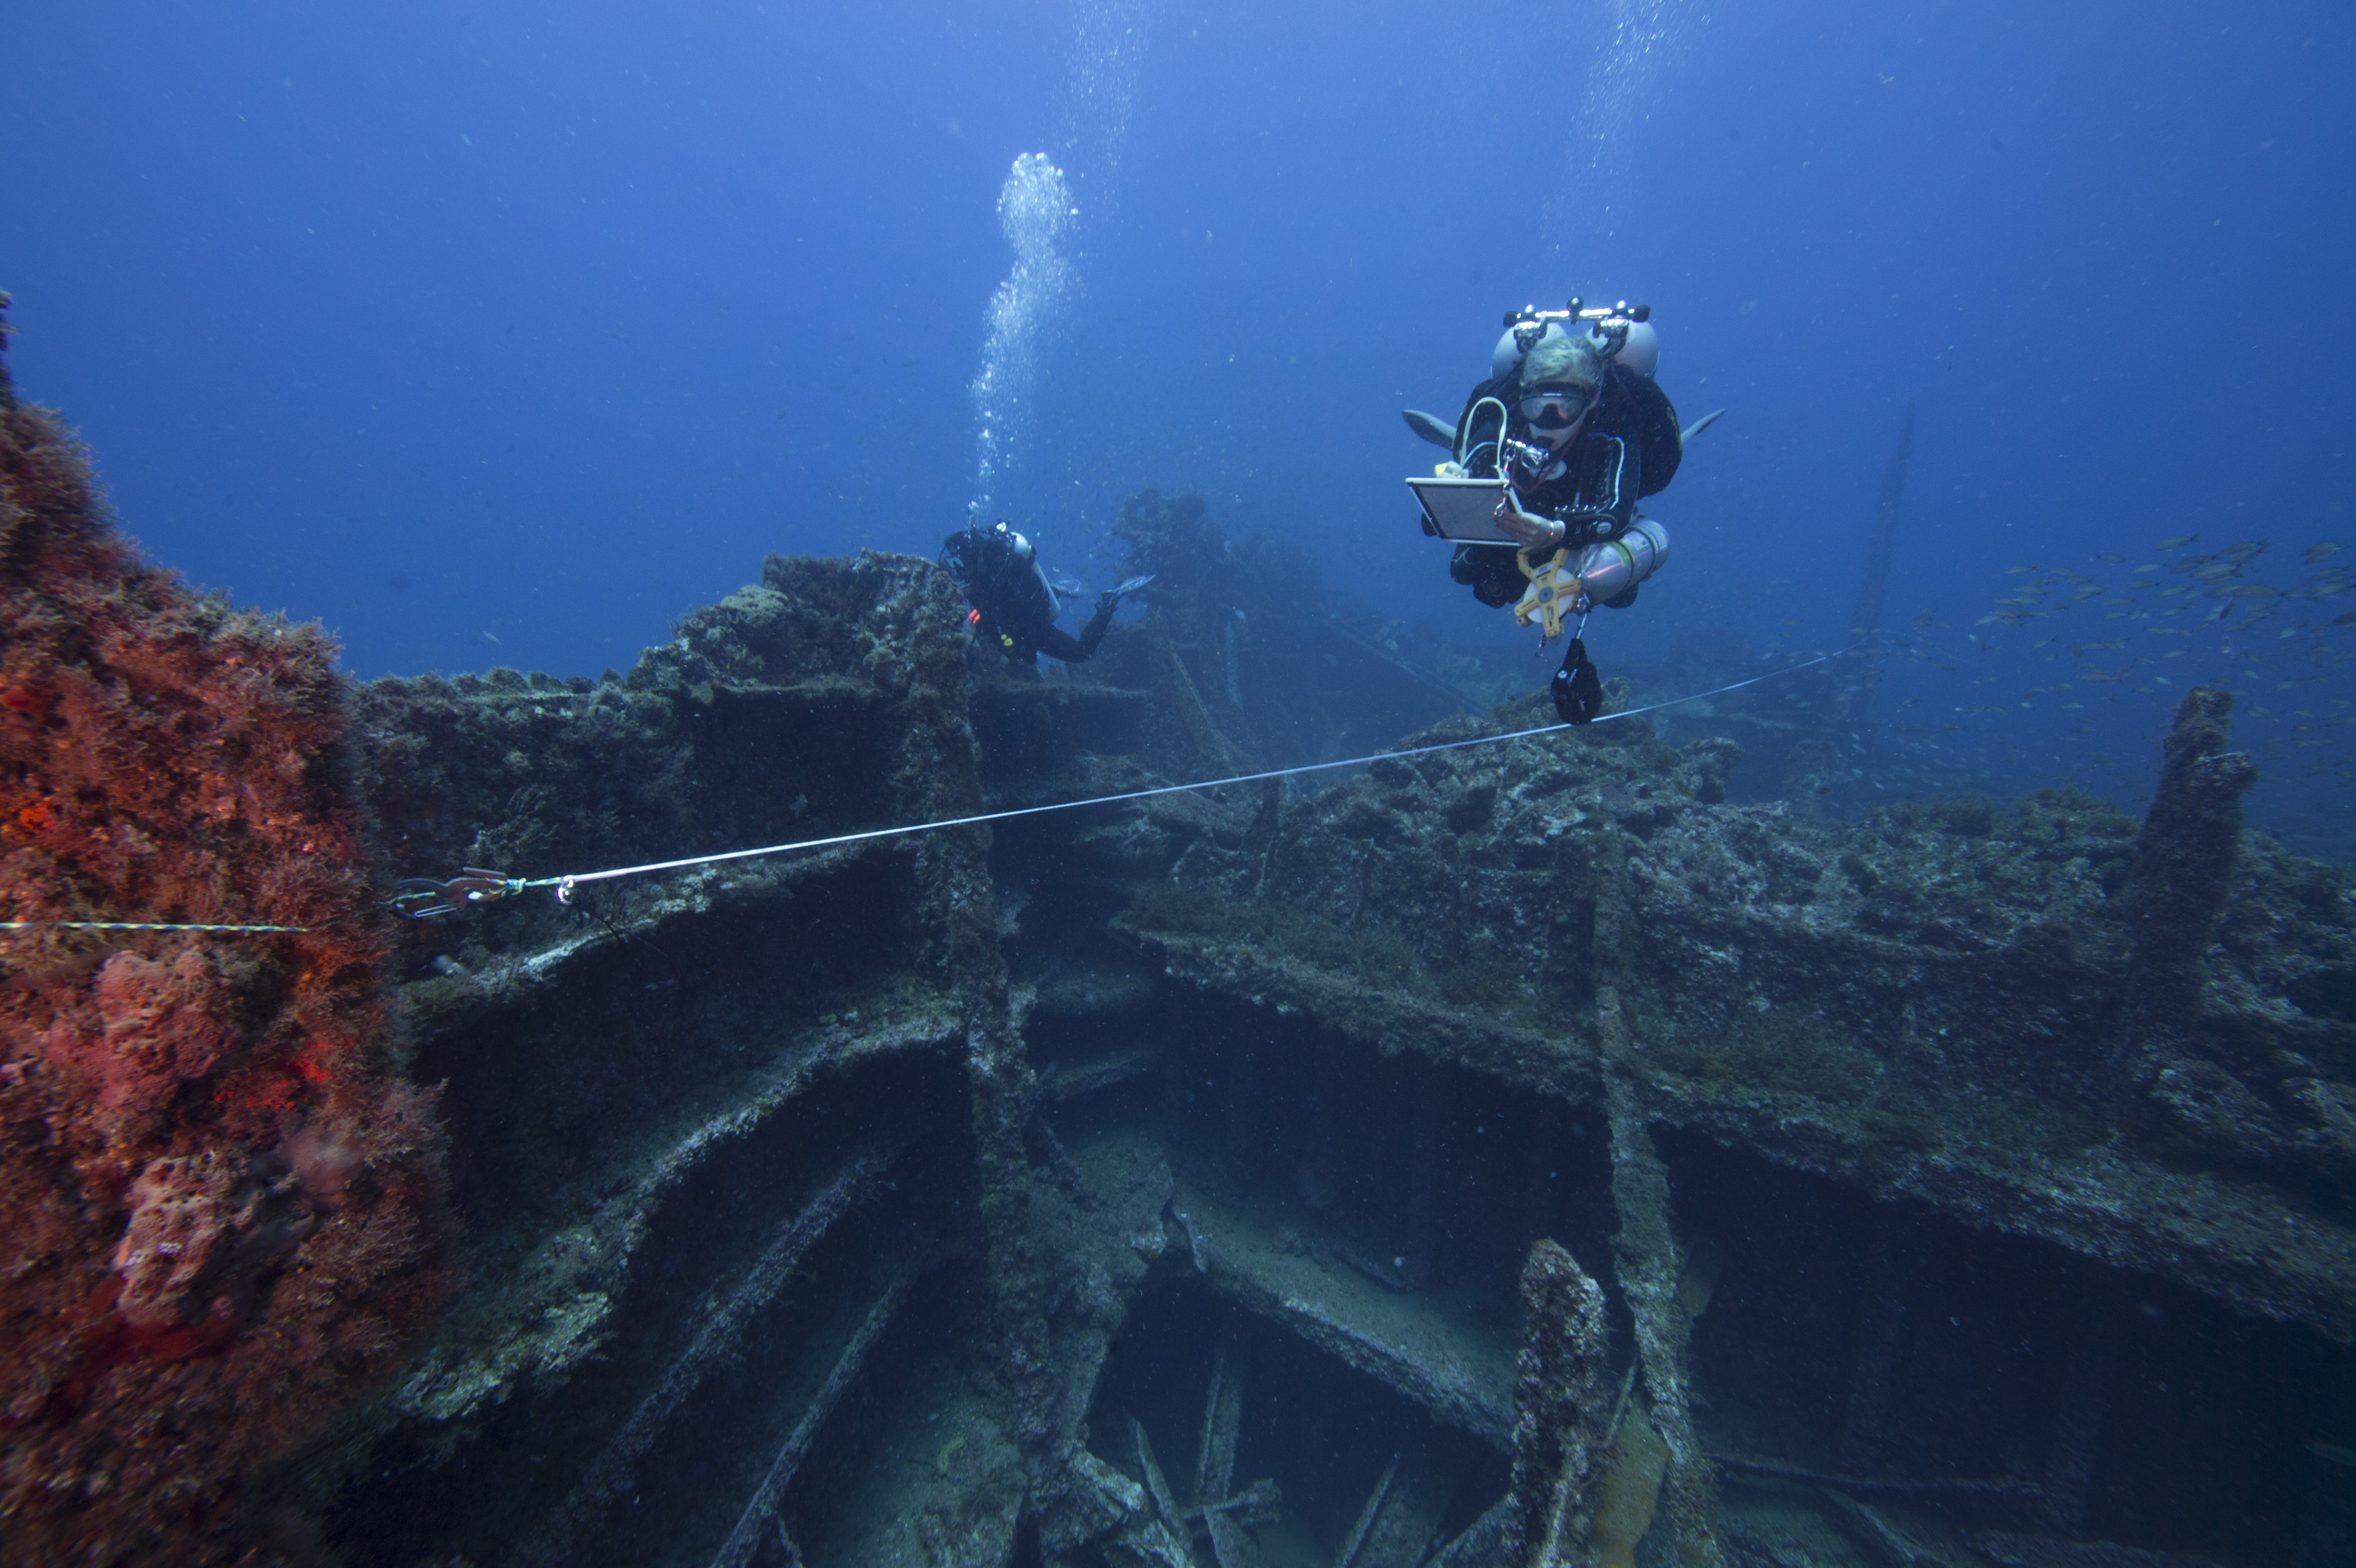 Surveying the wreck